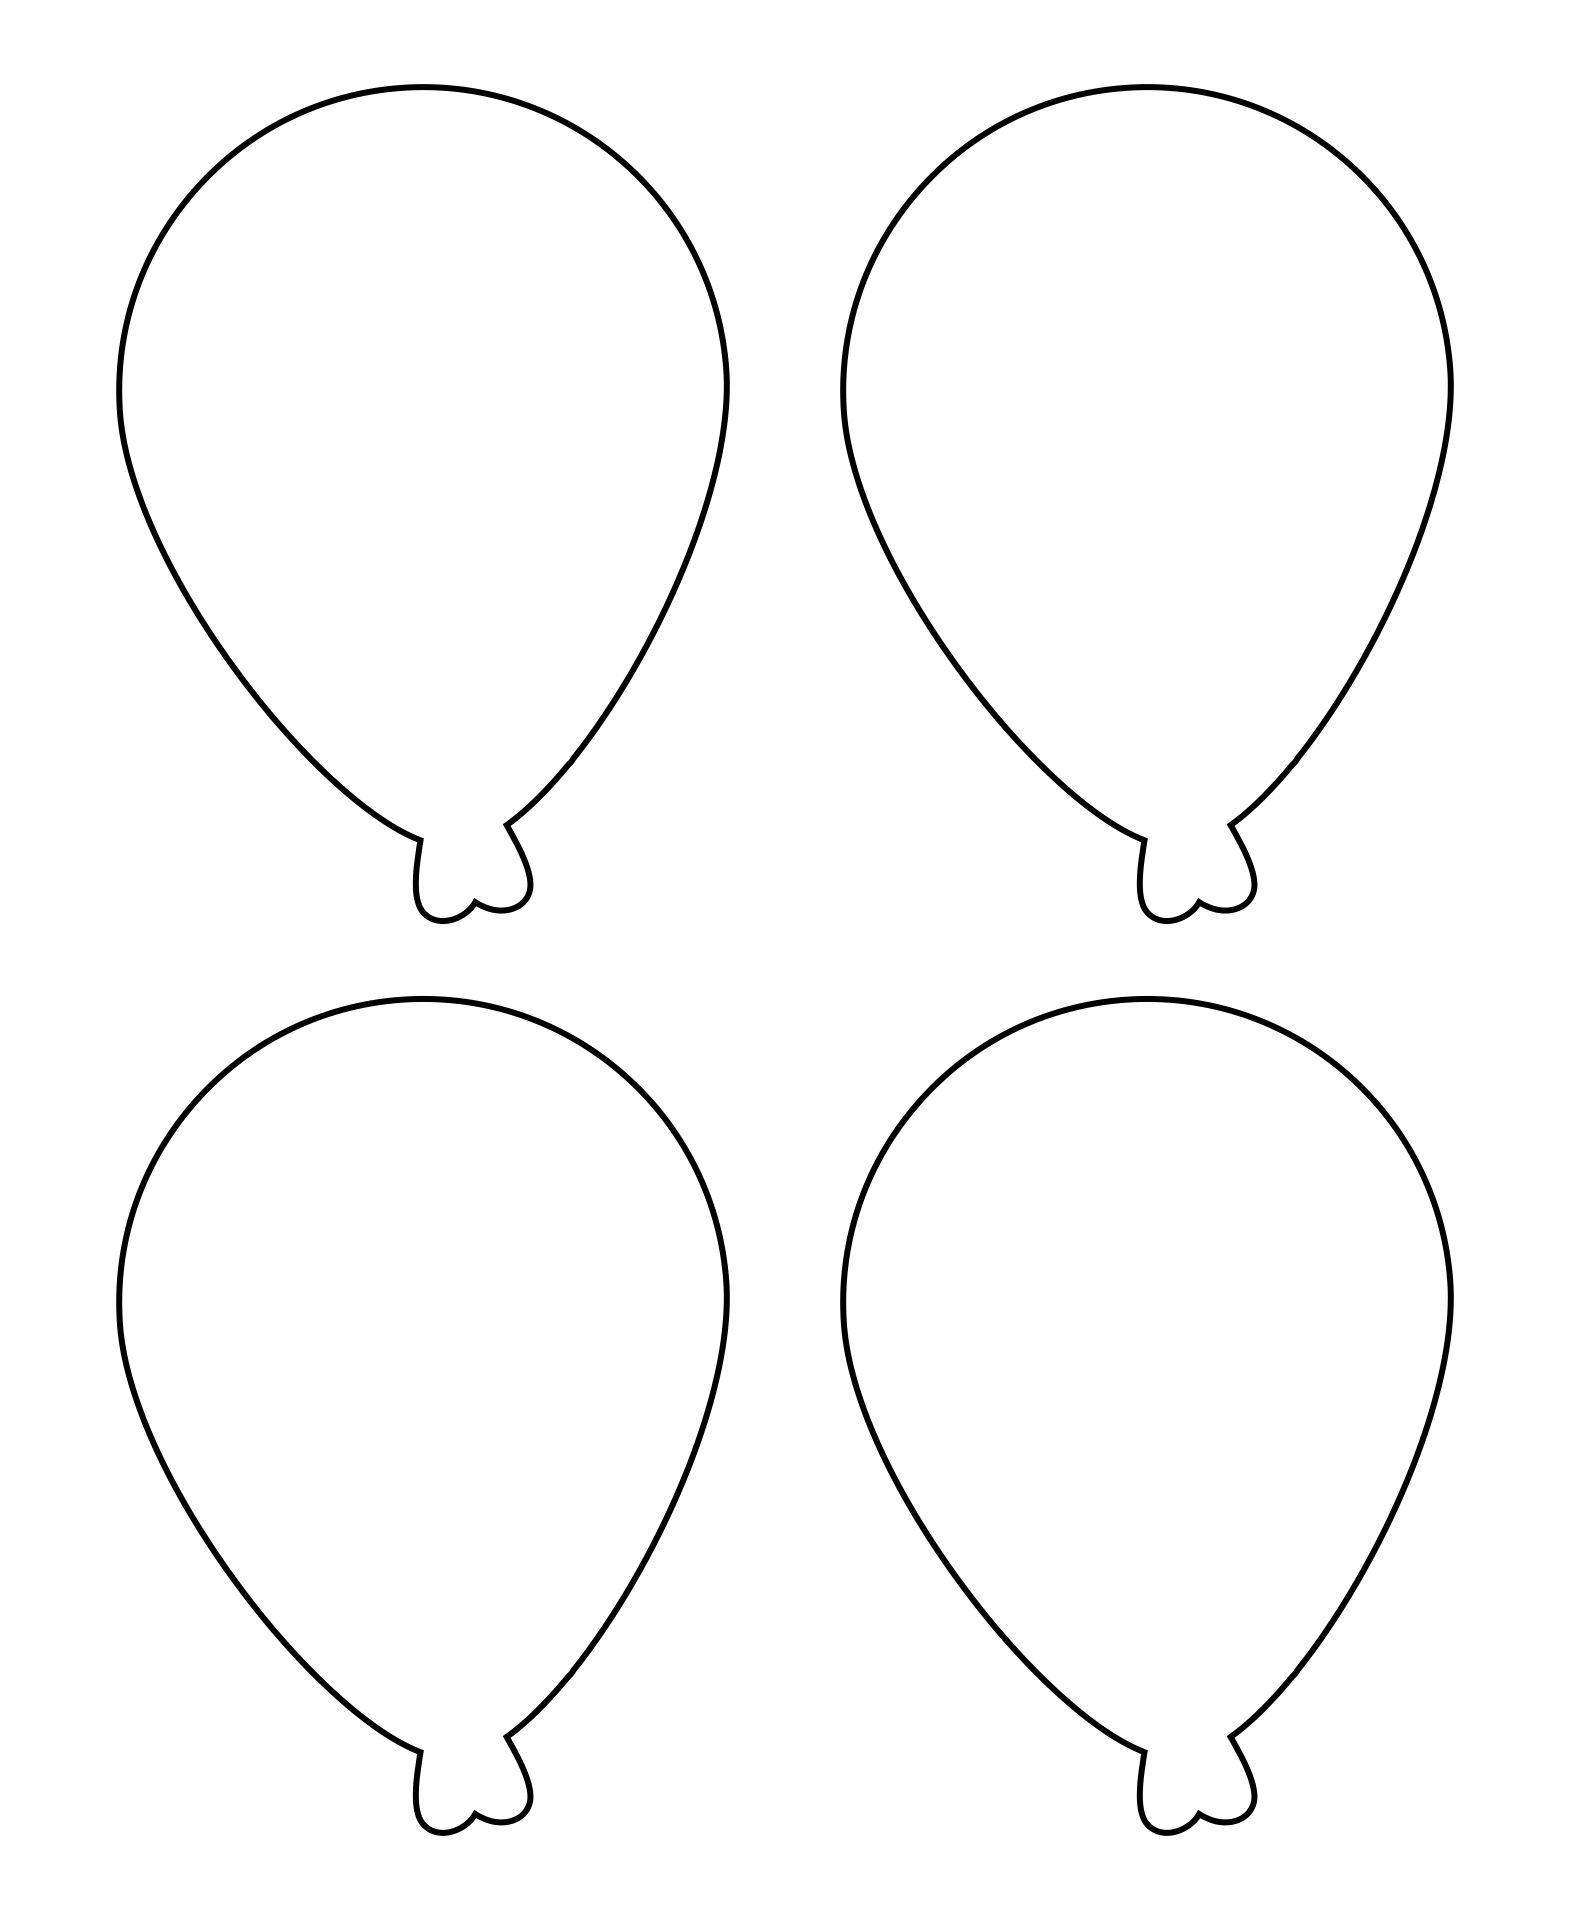 Balloon Template Free Printable Printable Form, Templates and Letter